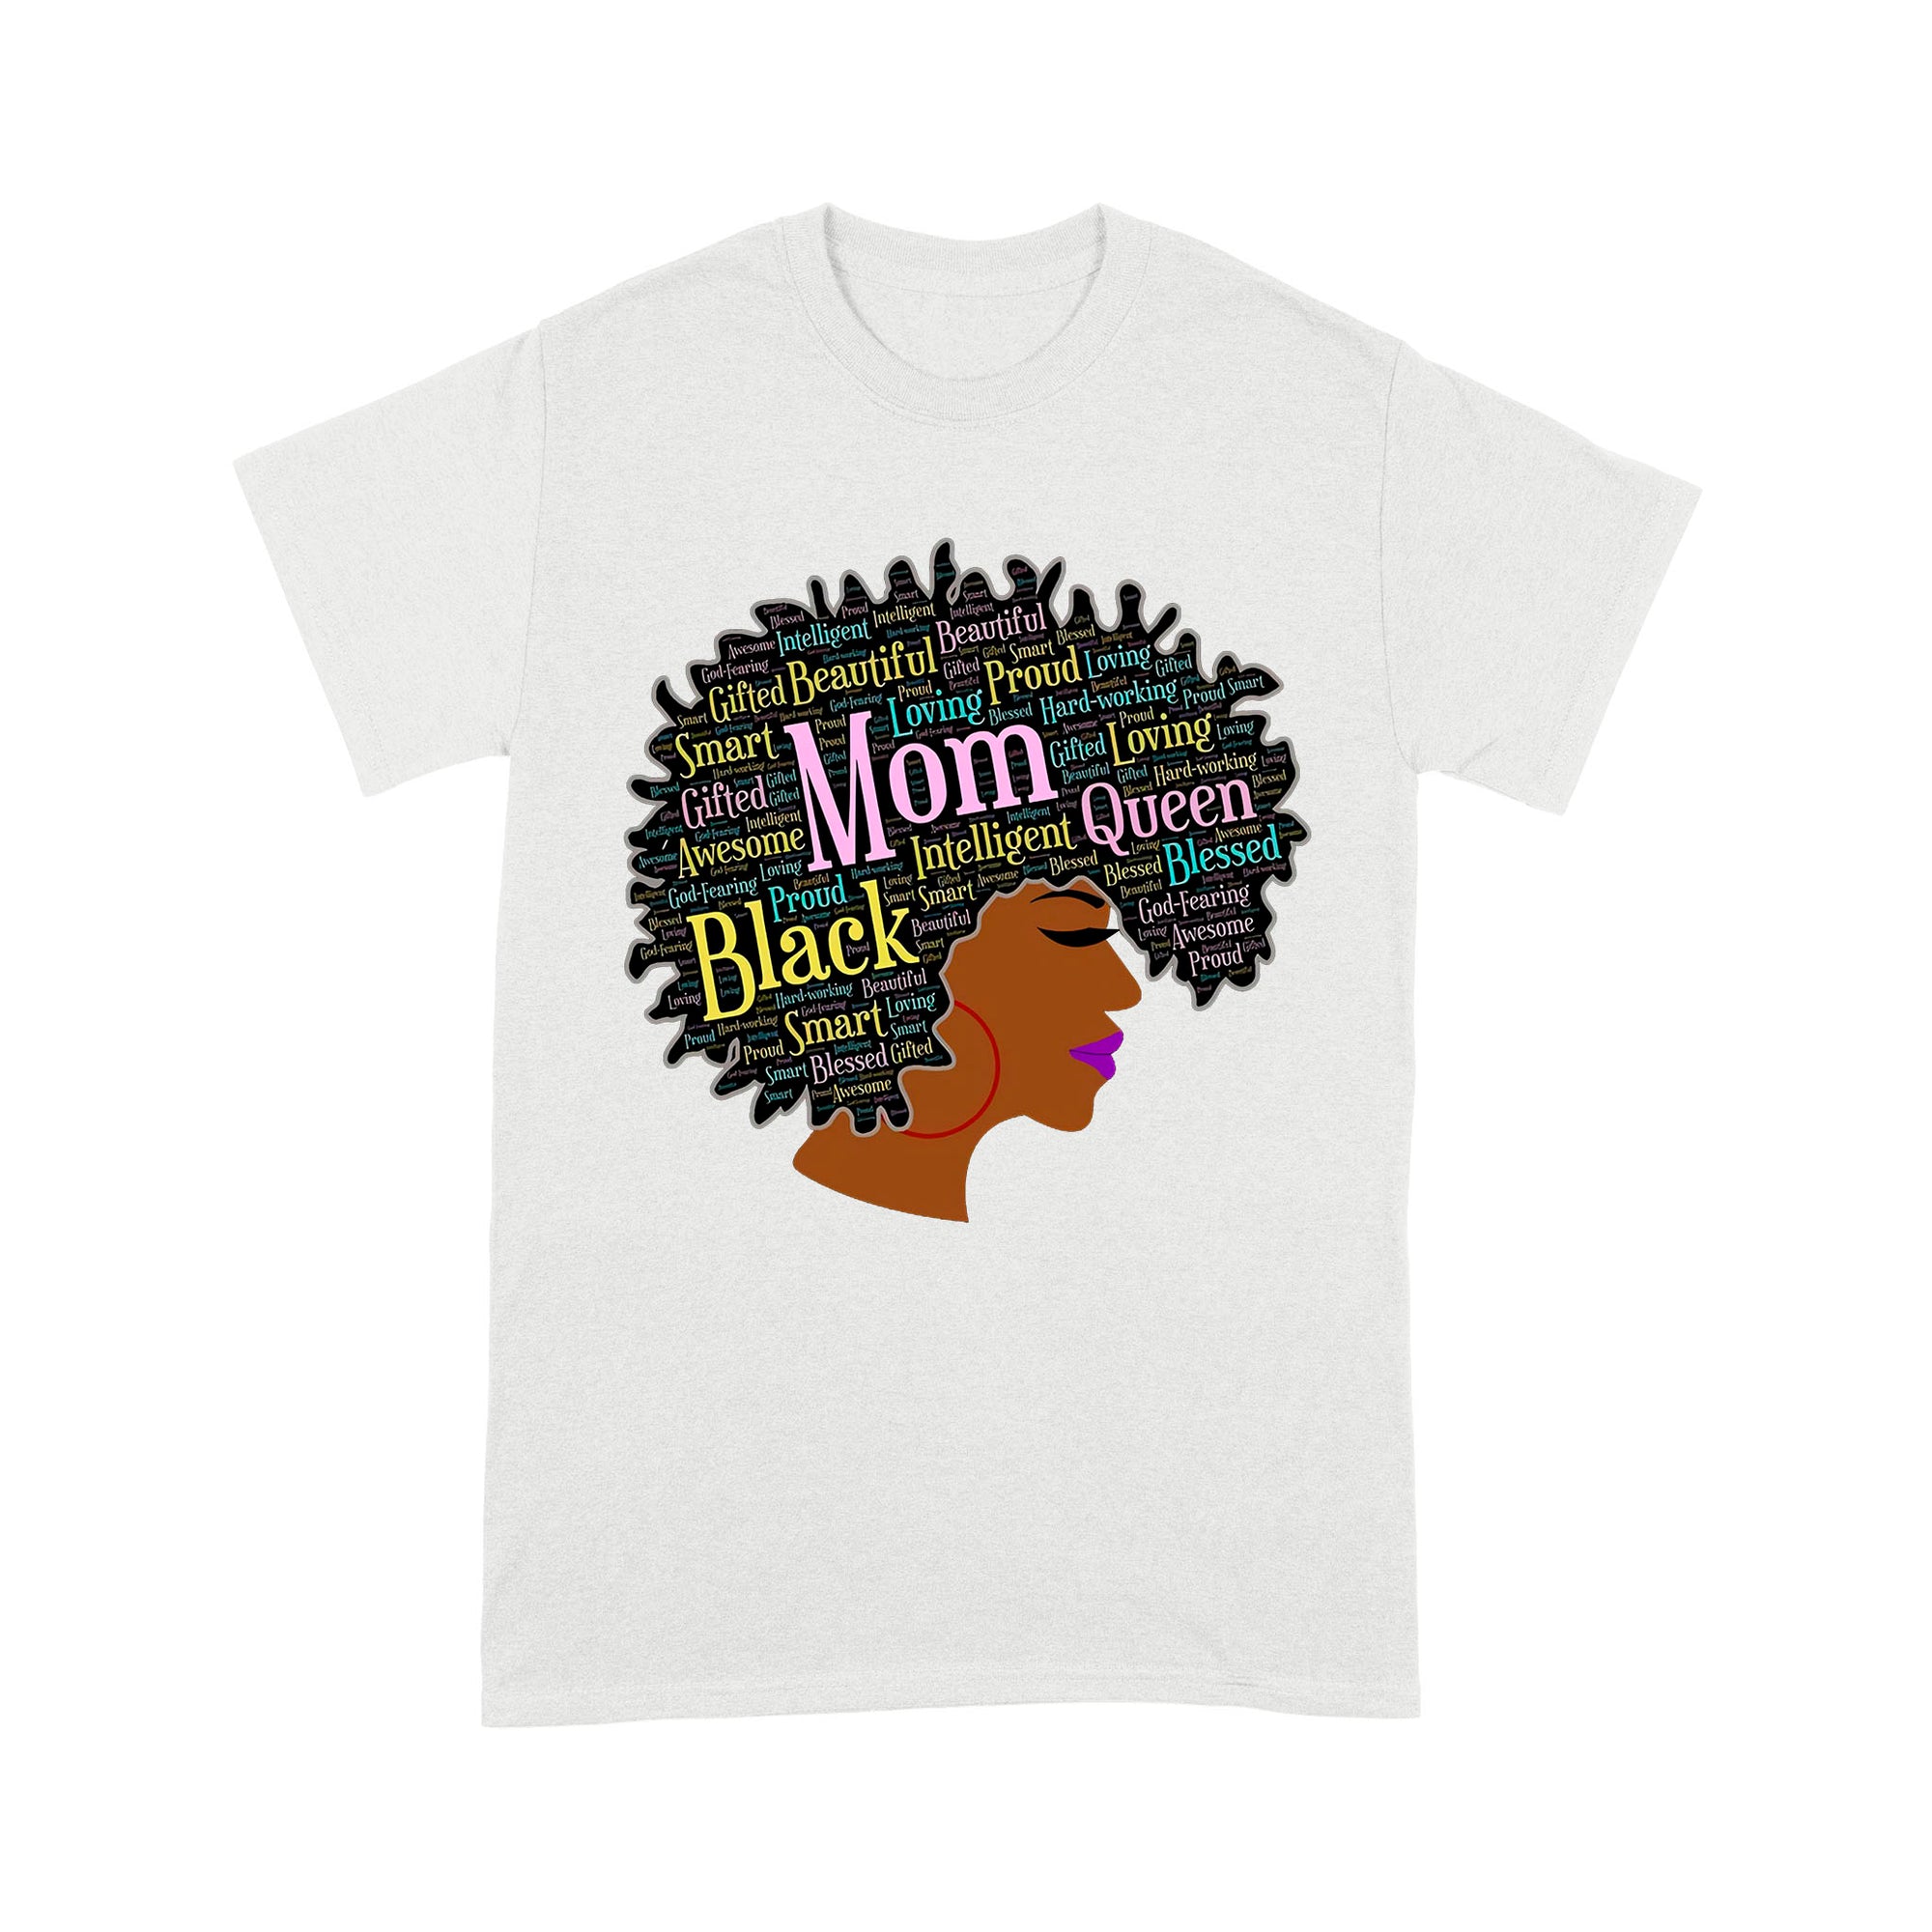 Premium T-shirt - Happy Mother’s Day Black Mom Queen Afro African Woman